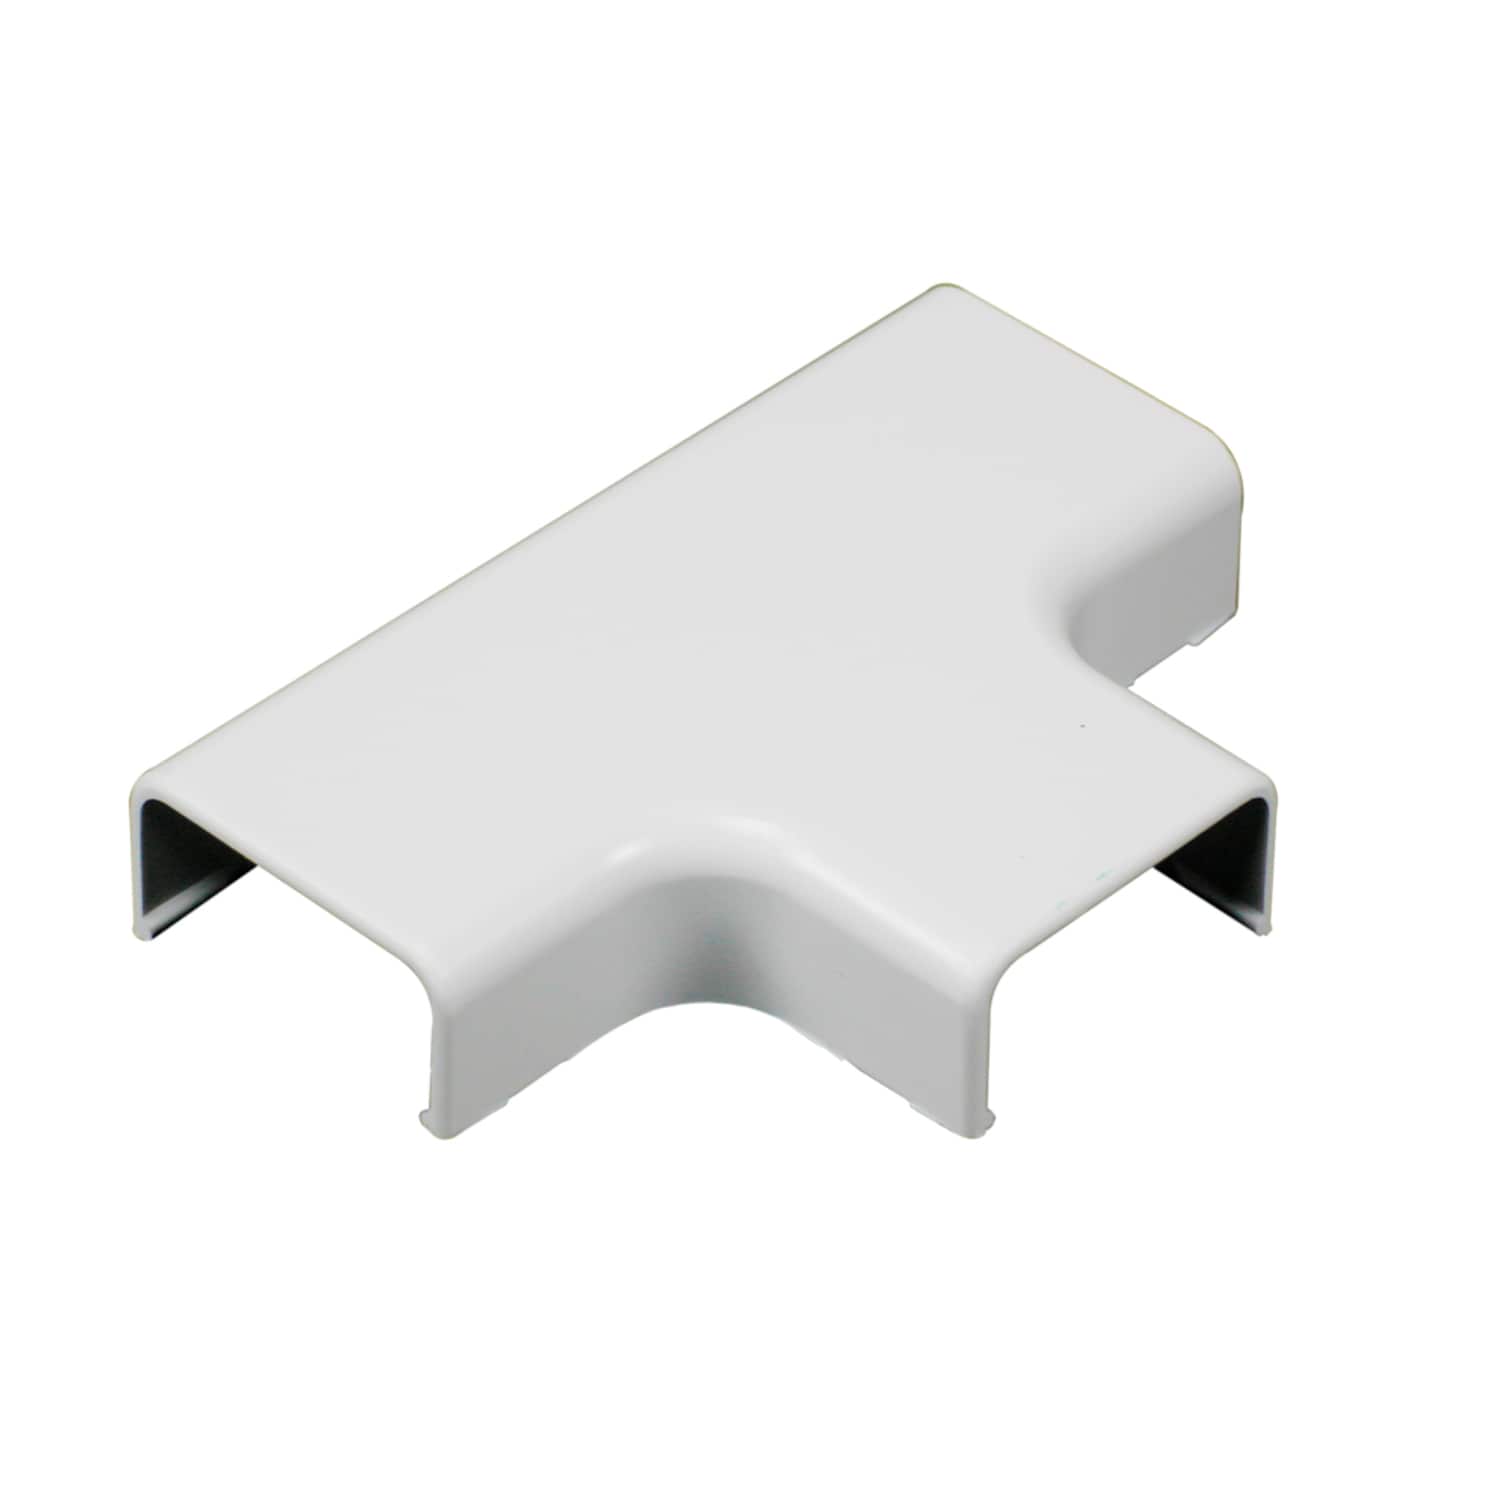 Ceiling/Wall Cord Covers & Organizers at